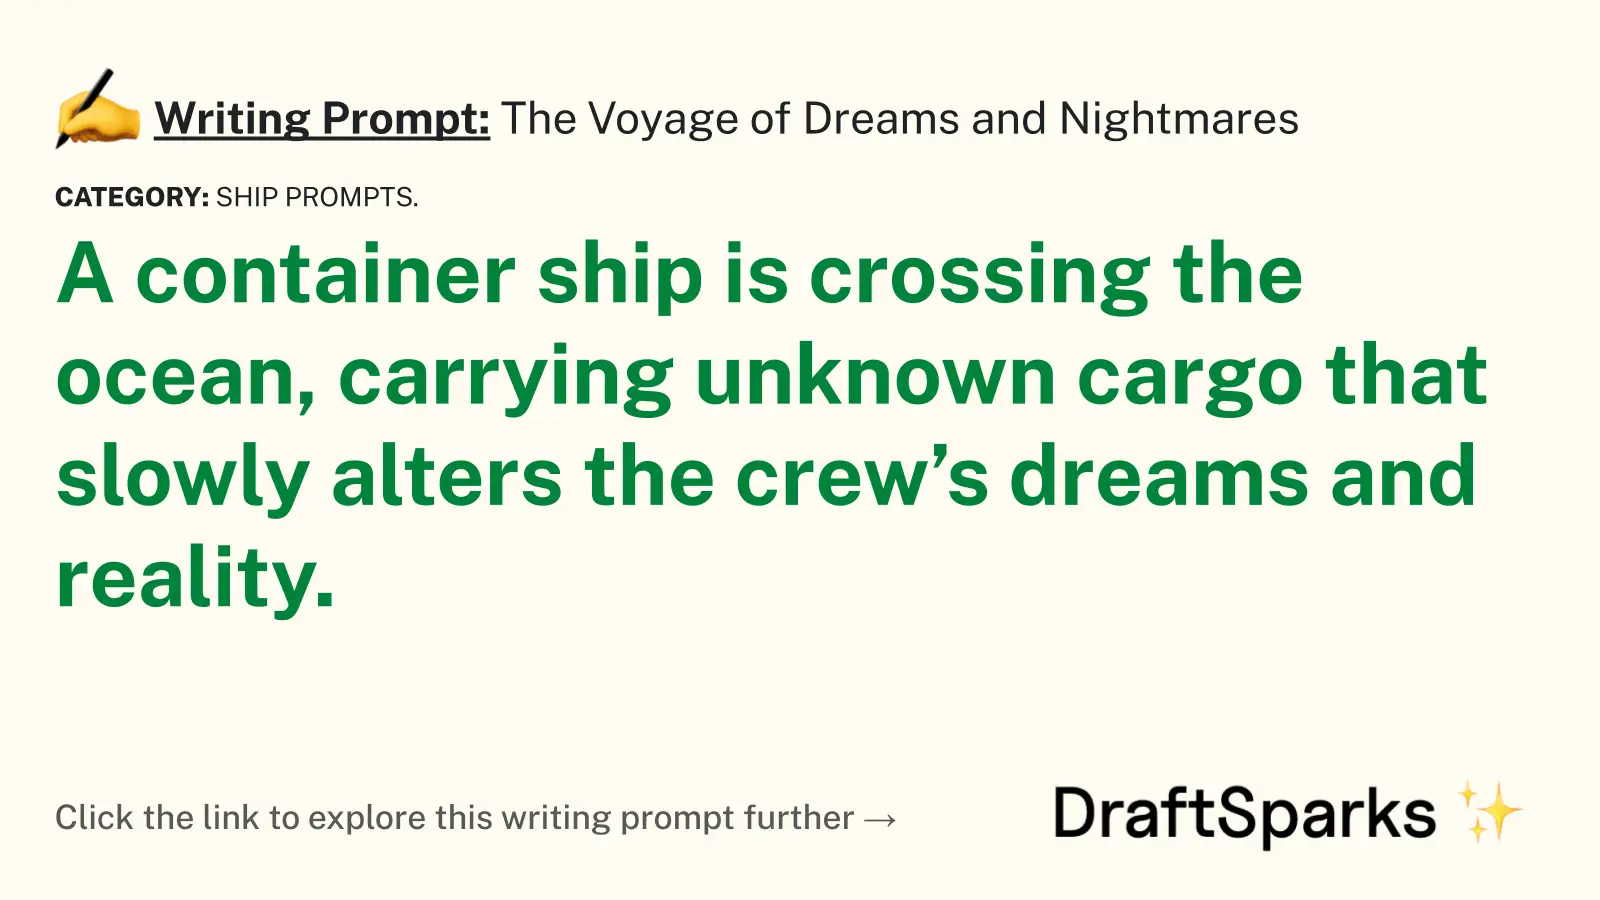 The Voyage of Dreams and Nightmares